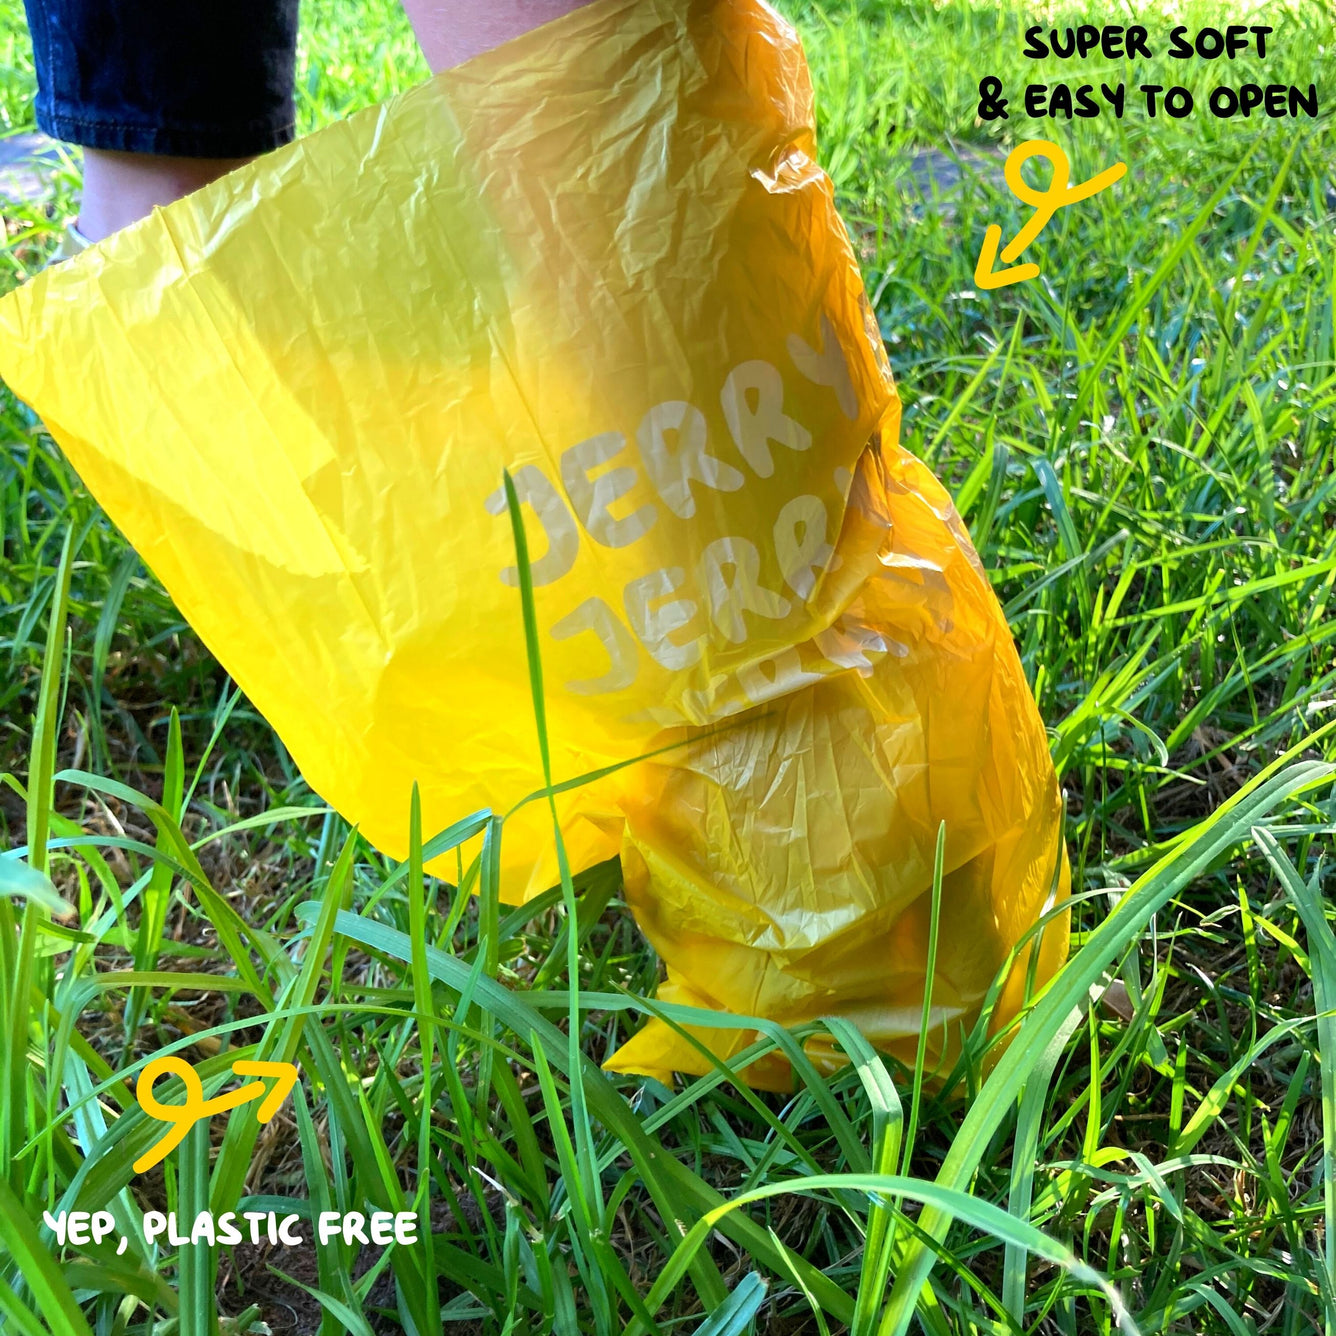 Yellow Jerry Bags in Grass dog poop bags compostable biodegradable kitty litter bag